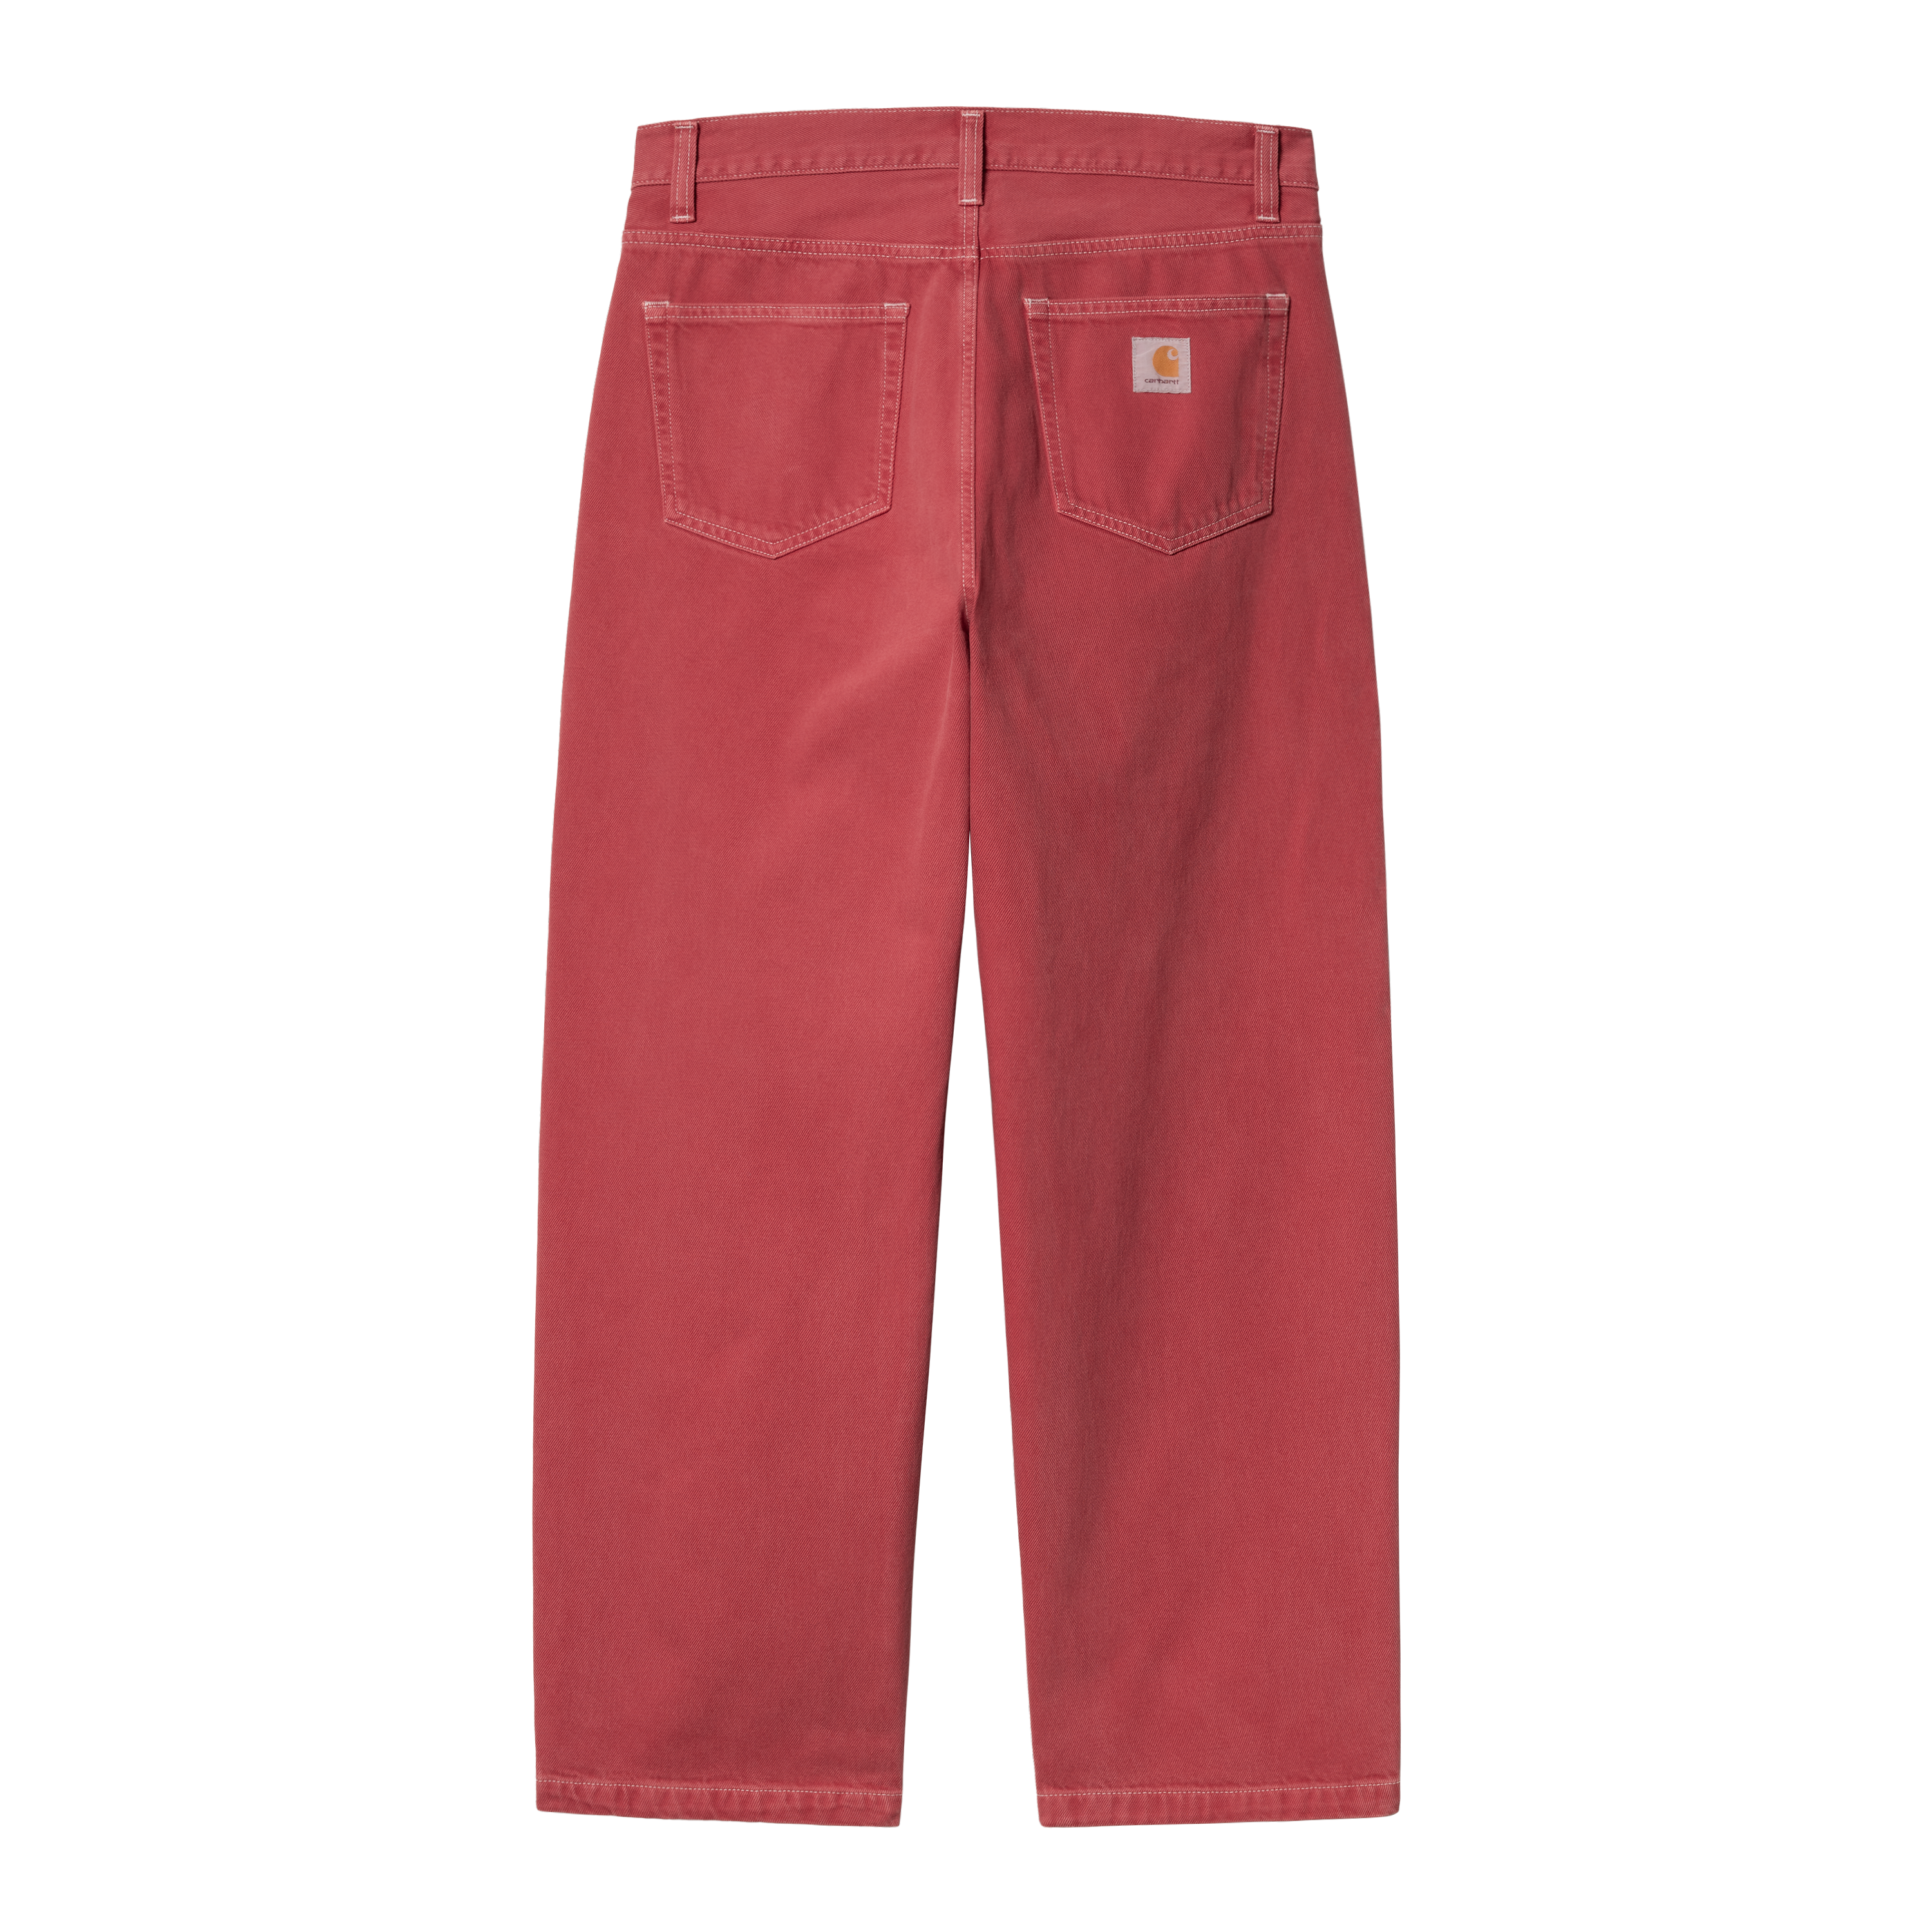 Carhartt WIP Landon Pant in Rosso